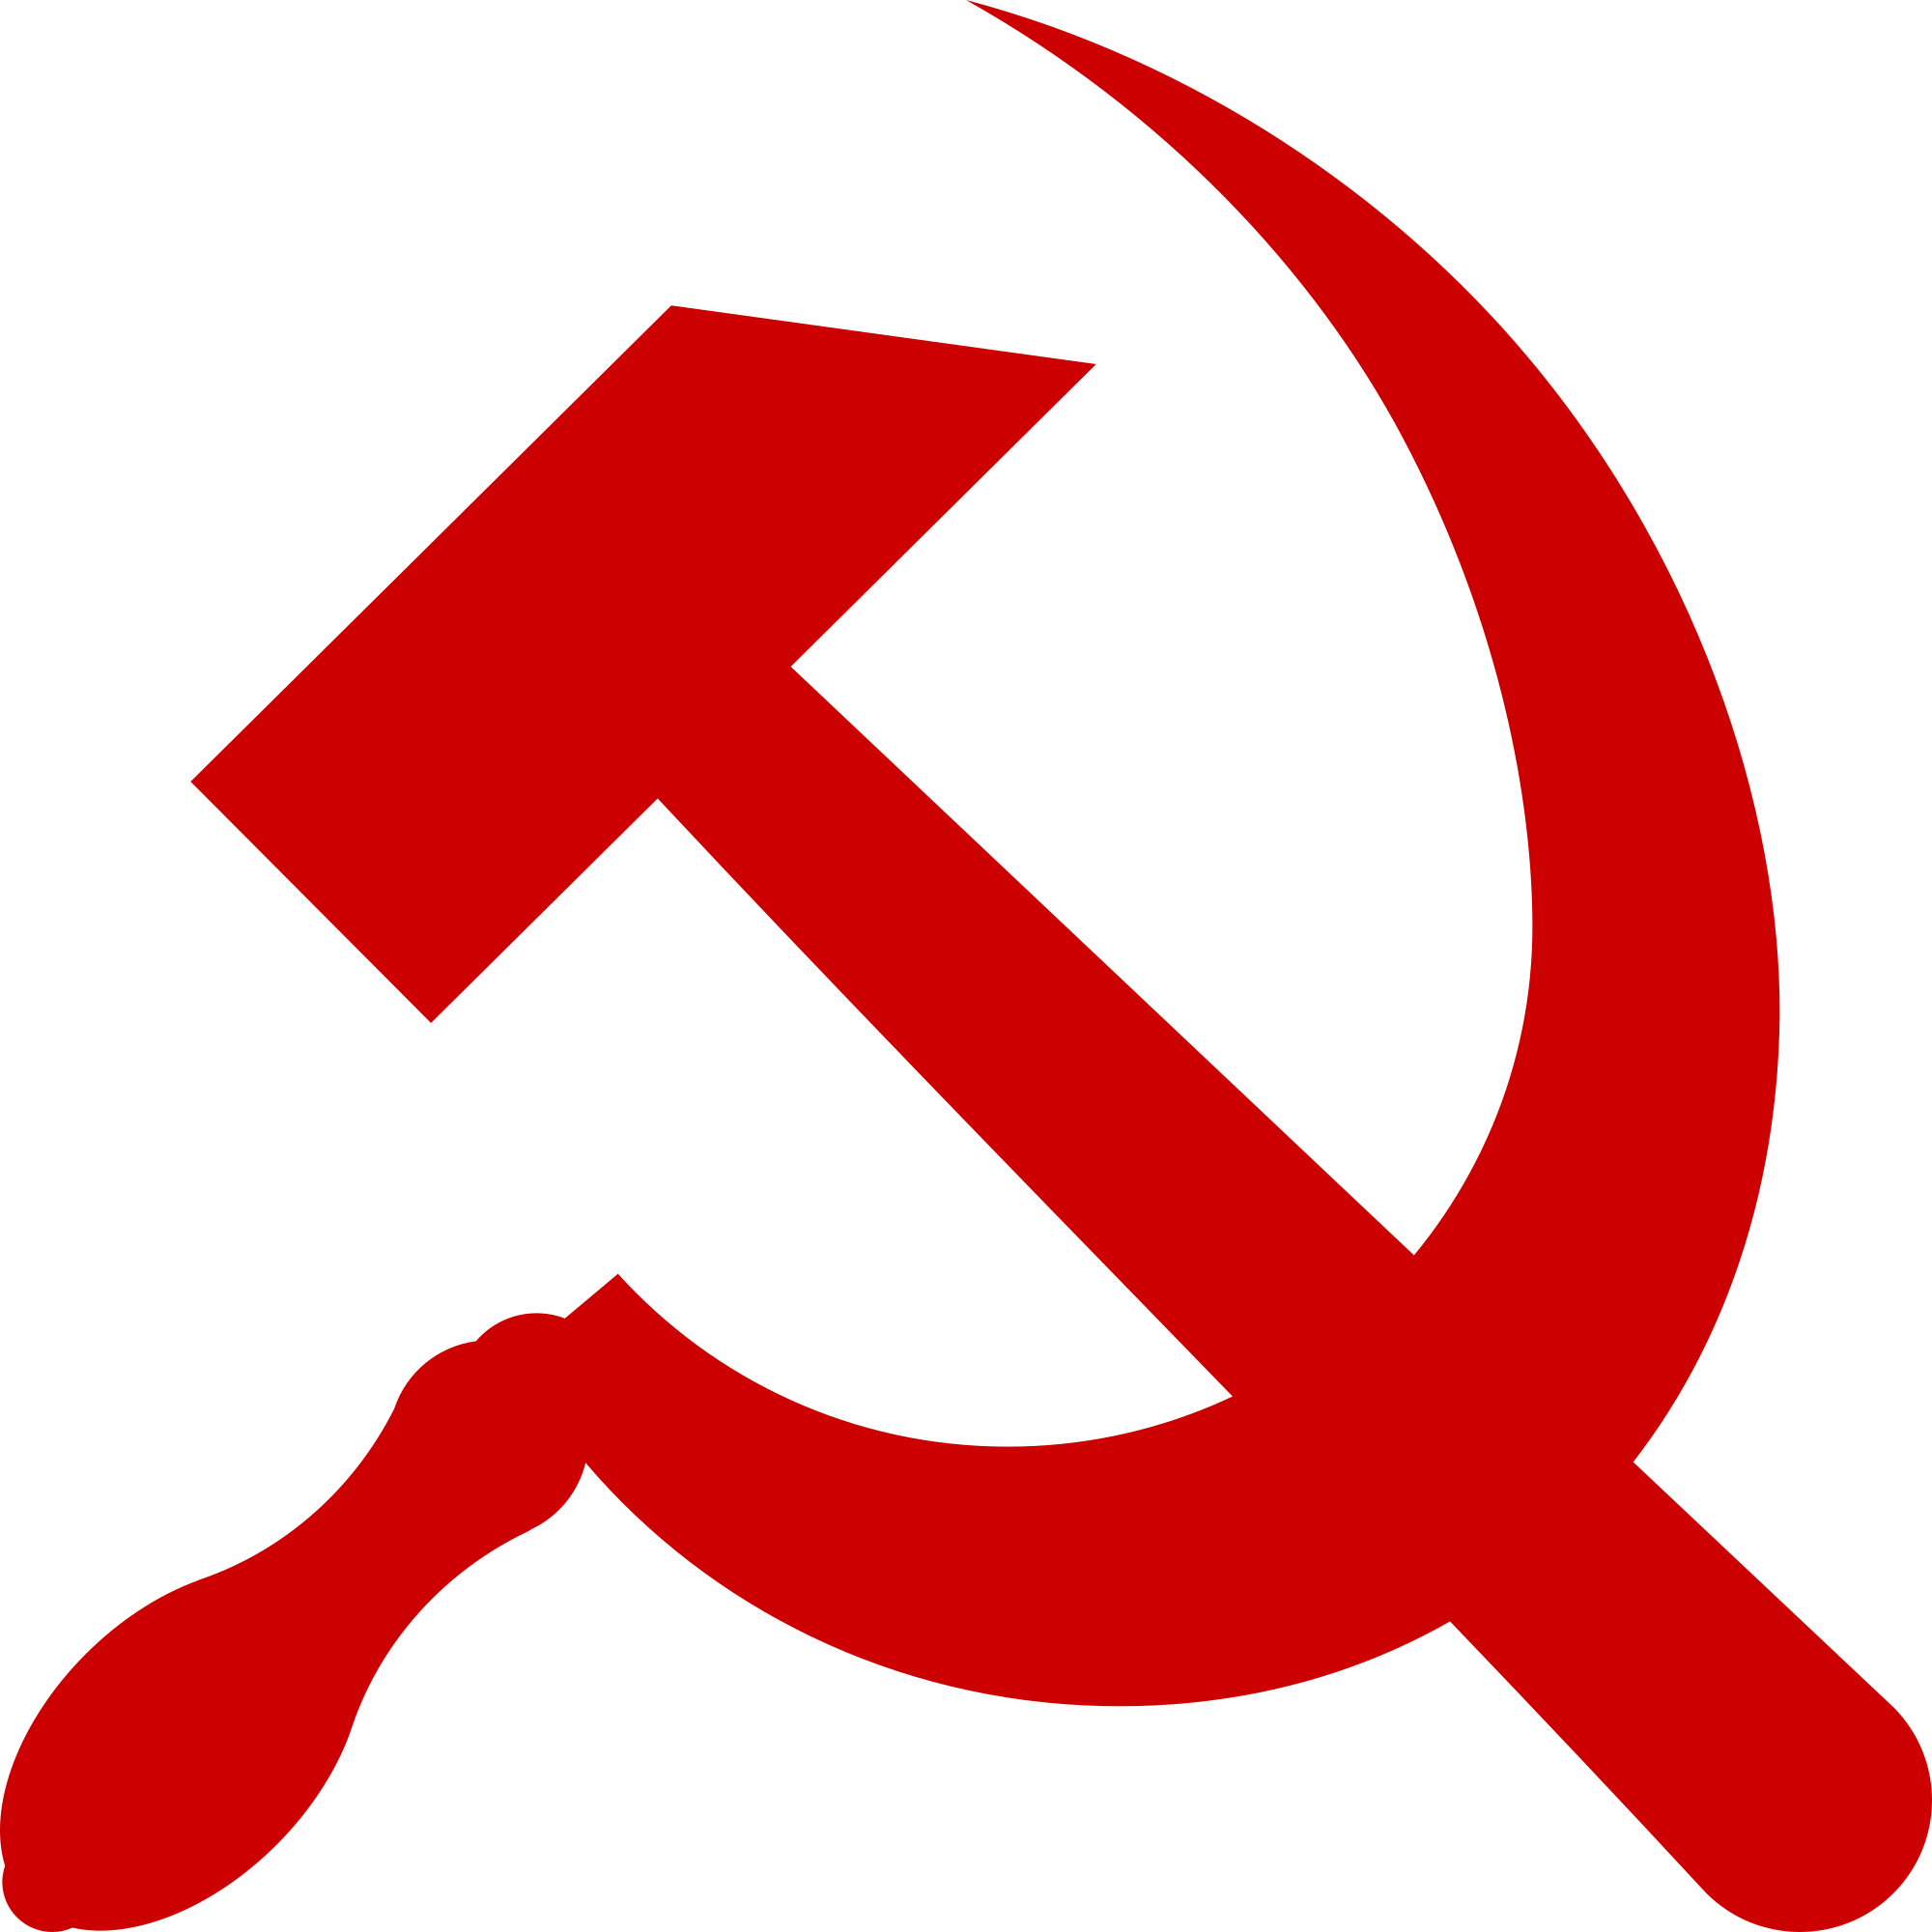 2000px-Hammer_and_sickle_red_on_transparent.svg.png